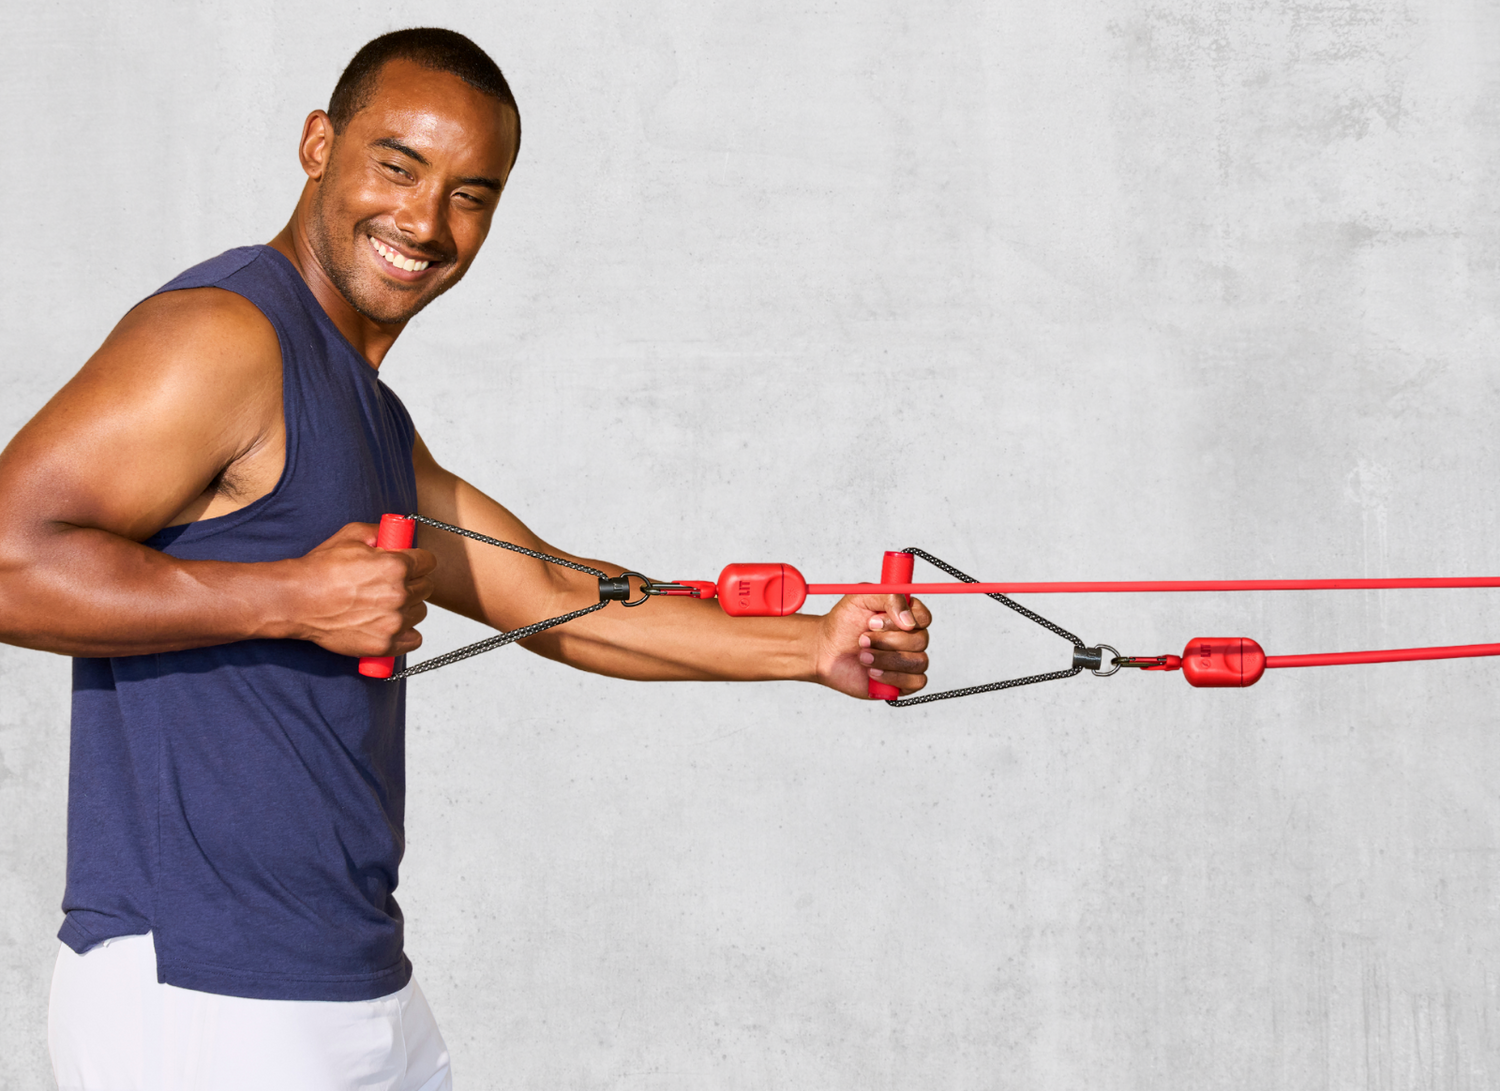 Resistance Band Exercises: 19 Ways to Get Ripped Using a Resistance Band